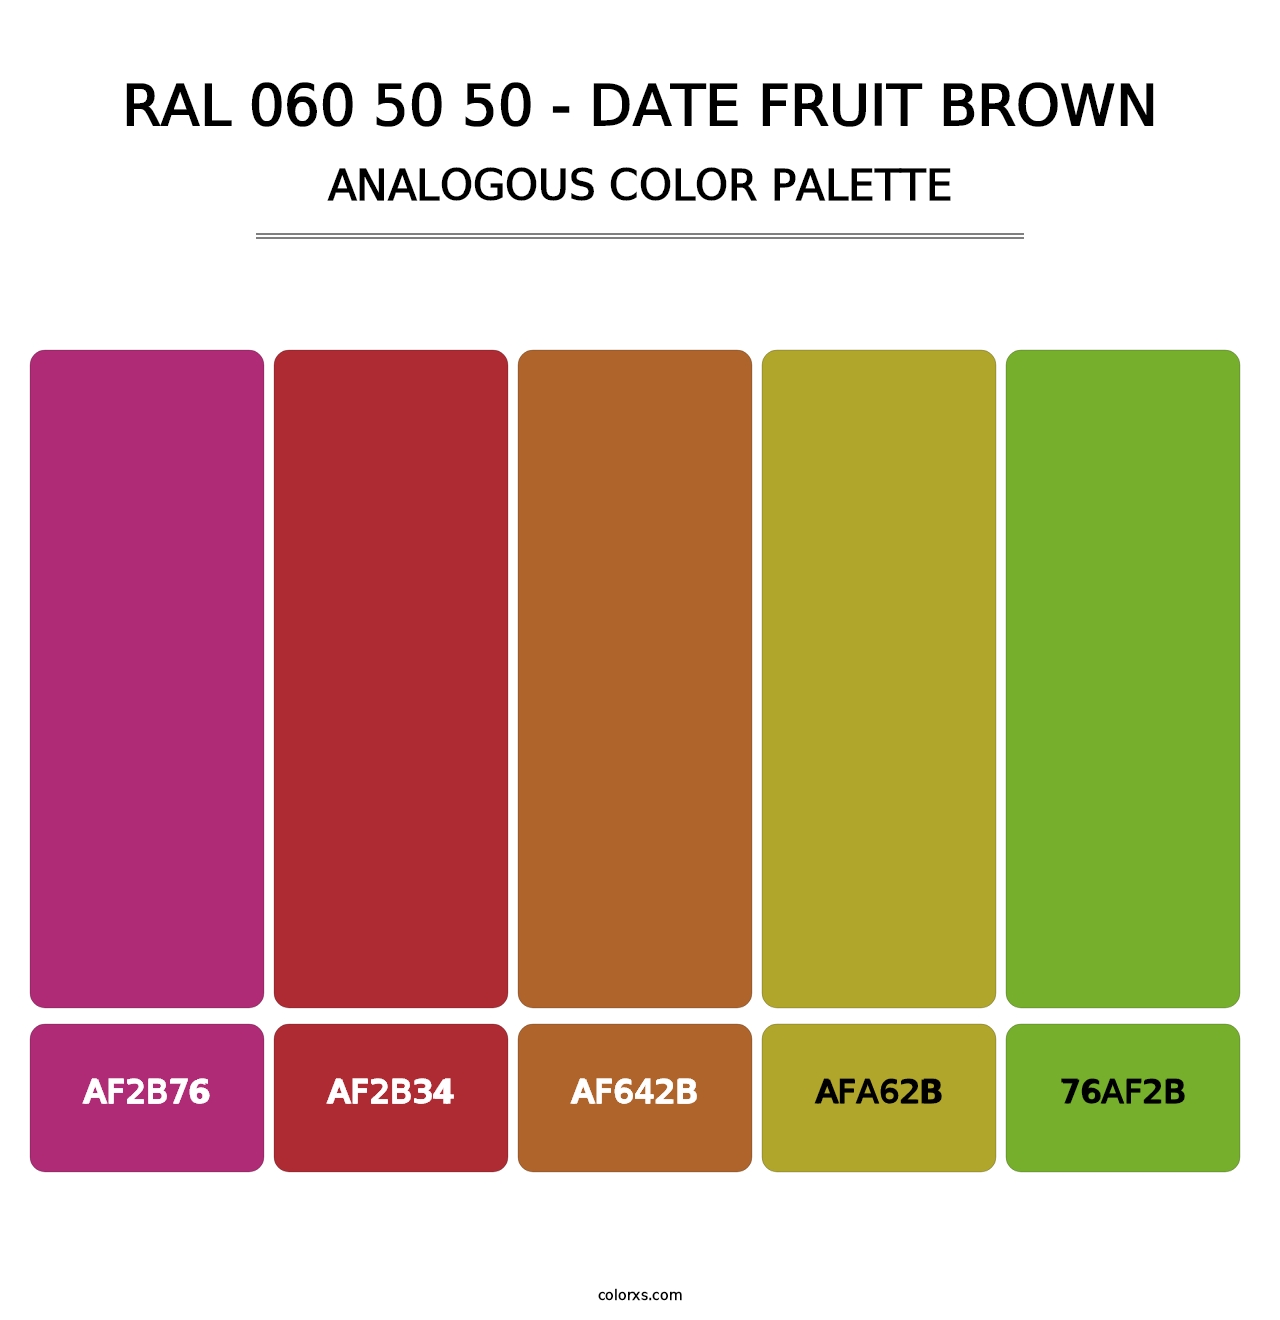 RAL 060 50 50 - Date Fruit Brown - Analogous Color Palette